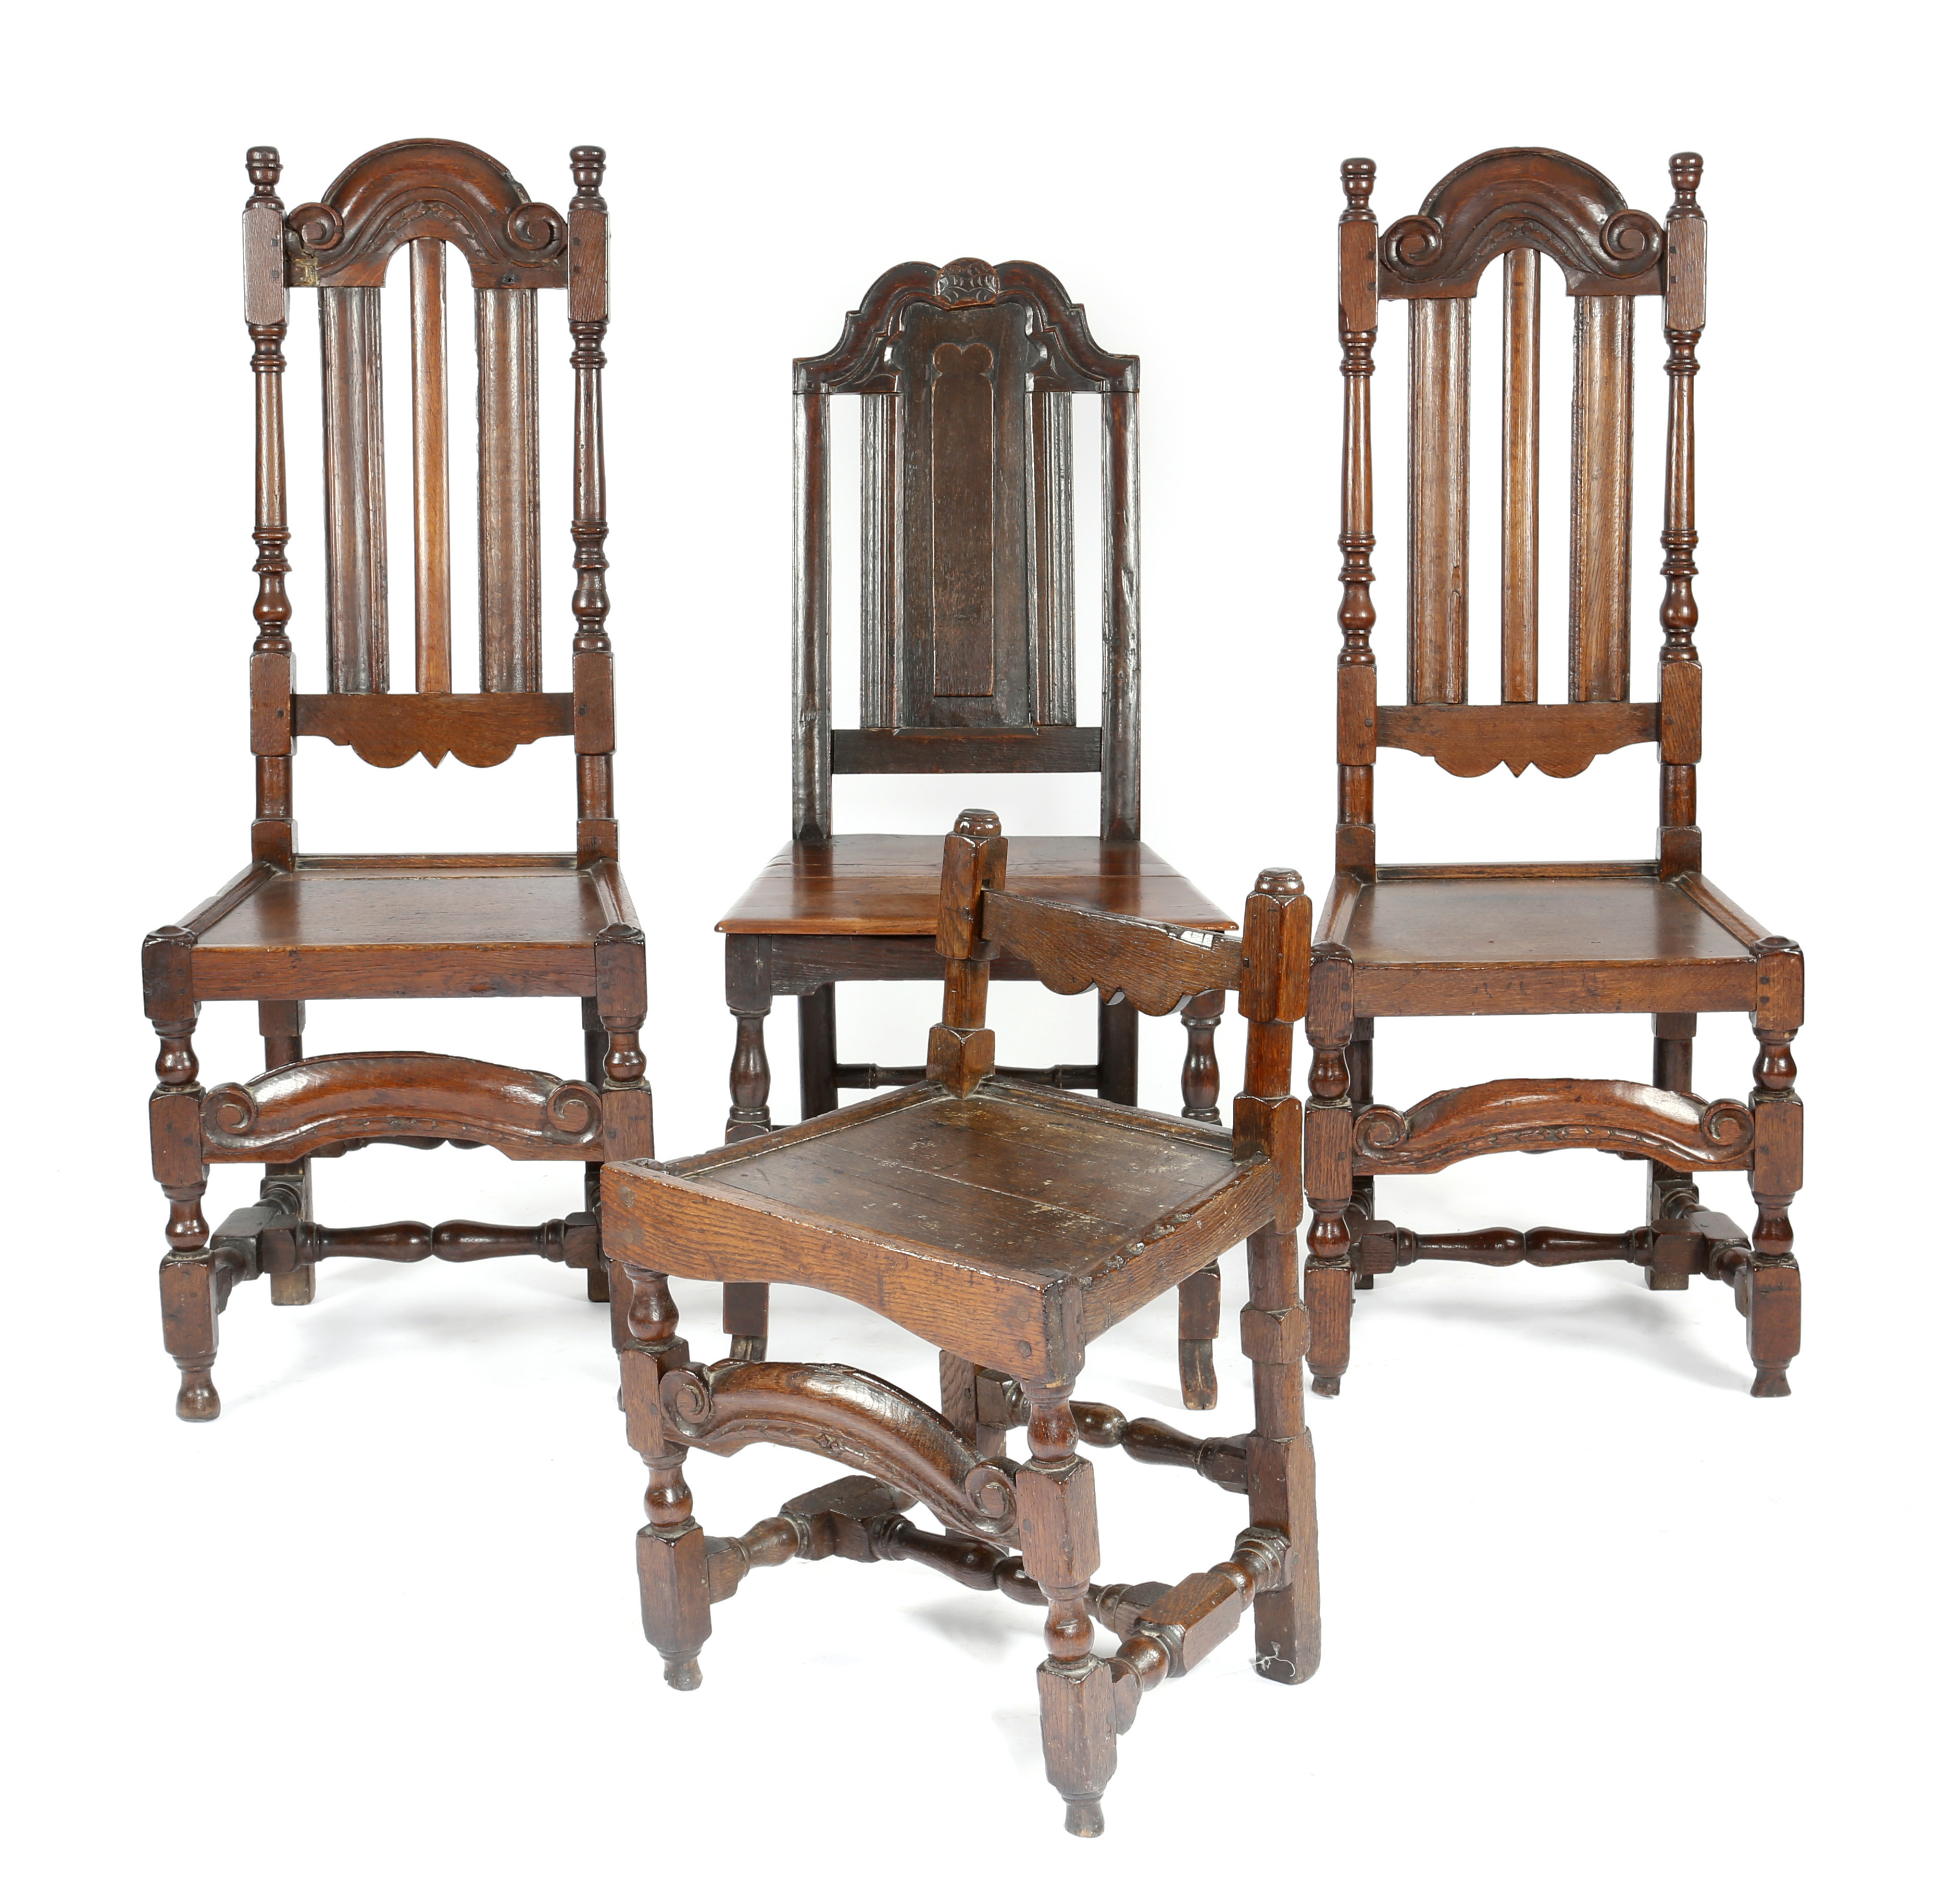 FOUR OAK CHAIRS LATE 17TH / EARLY 18TH CENTURY comprising: a pair of splat back side chairs, each